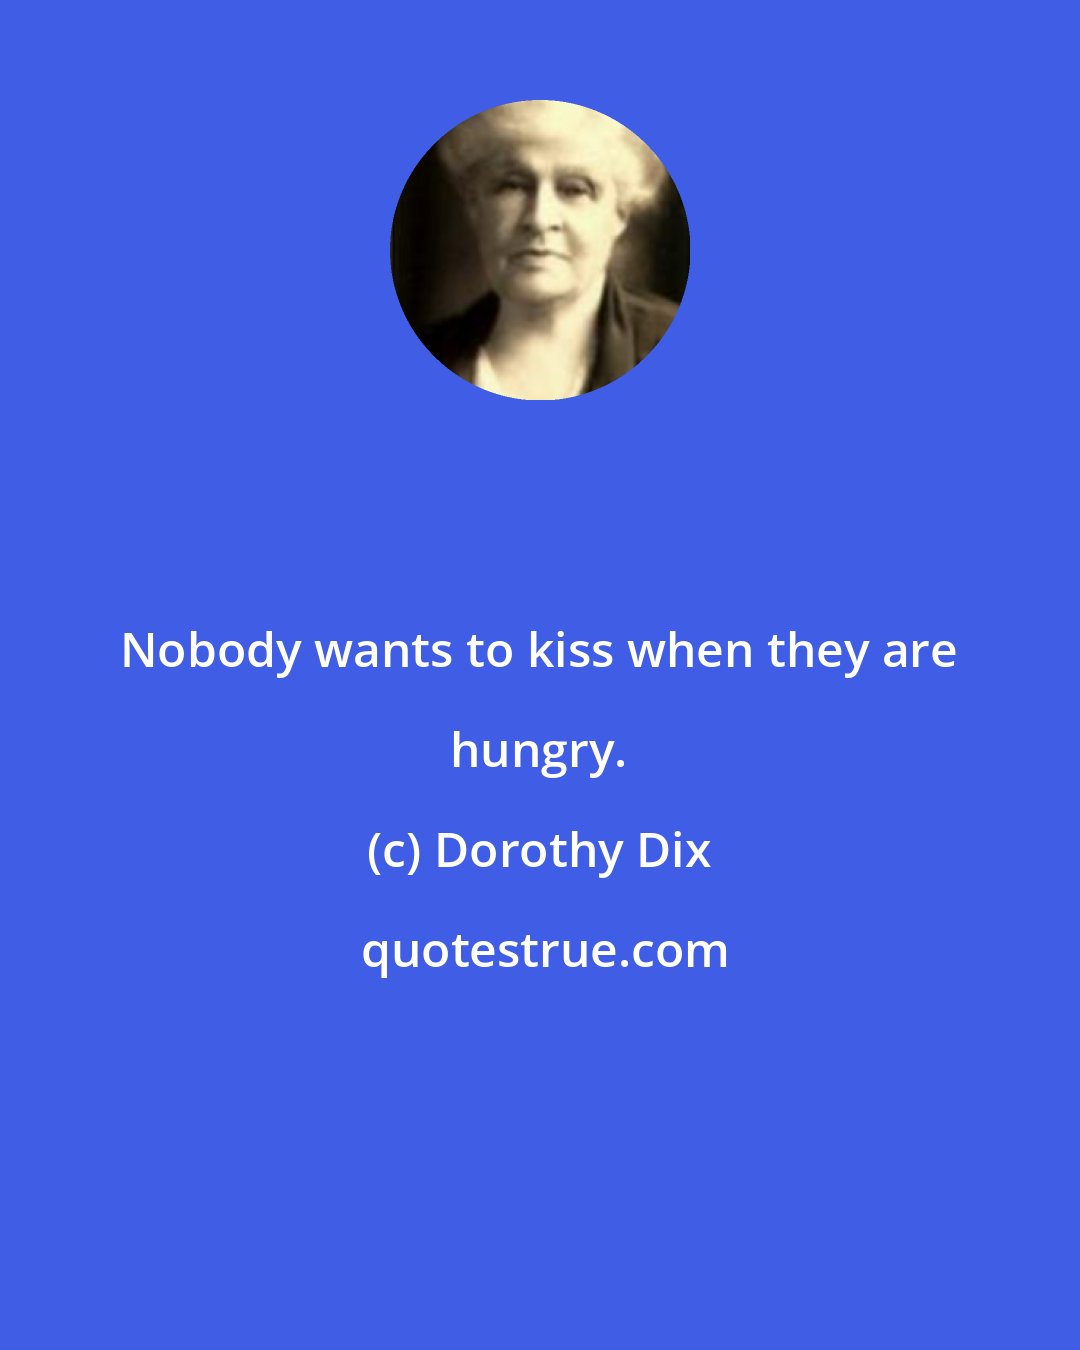 Dorothy Dix: Nobody wants to kiss when they are hungry.